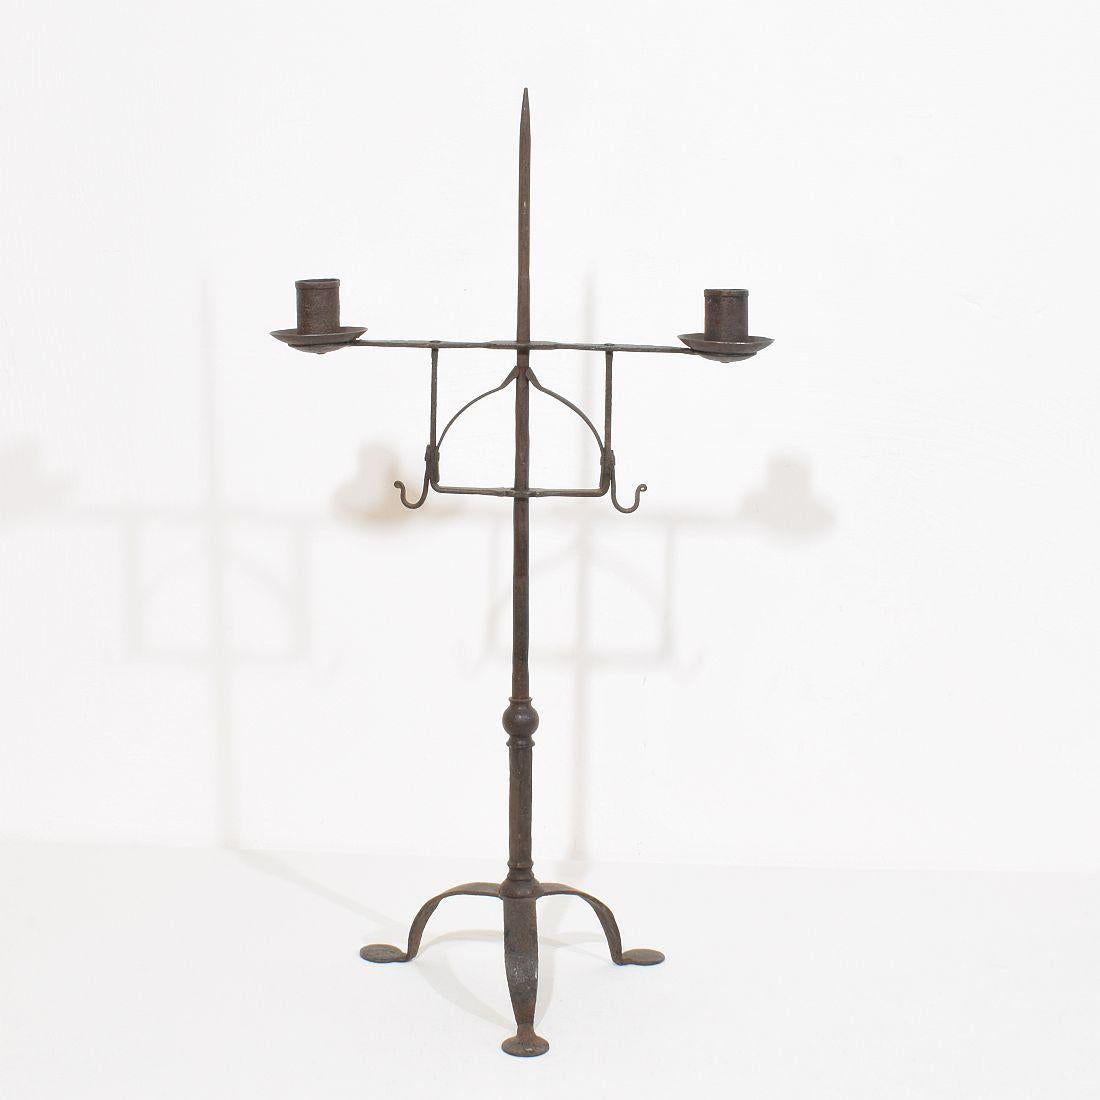 Very pure and beautiful hand forged iron candleholder, England, circa 1700-1800. Despite of its age in a very good condition. Candleholder can be adjusted in height.